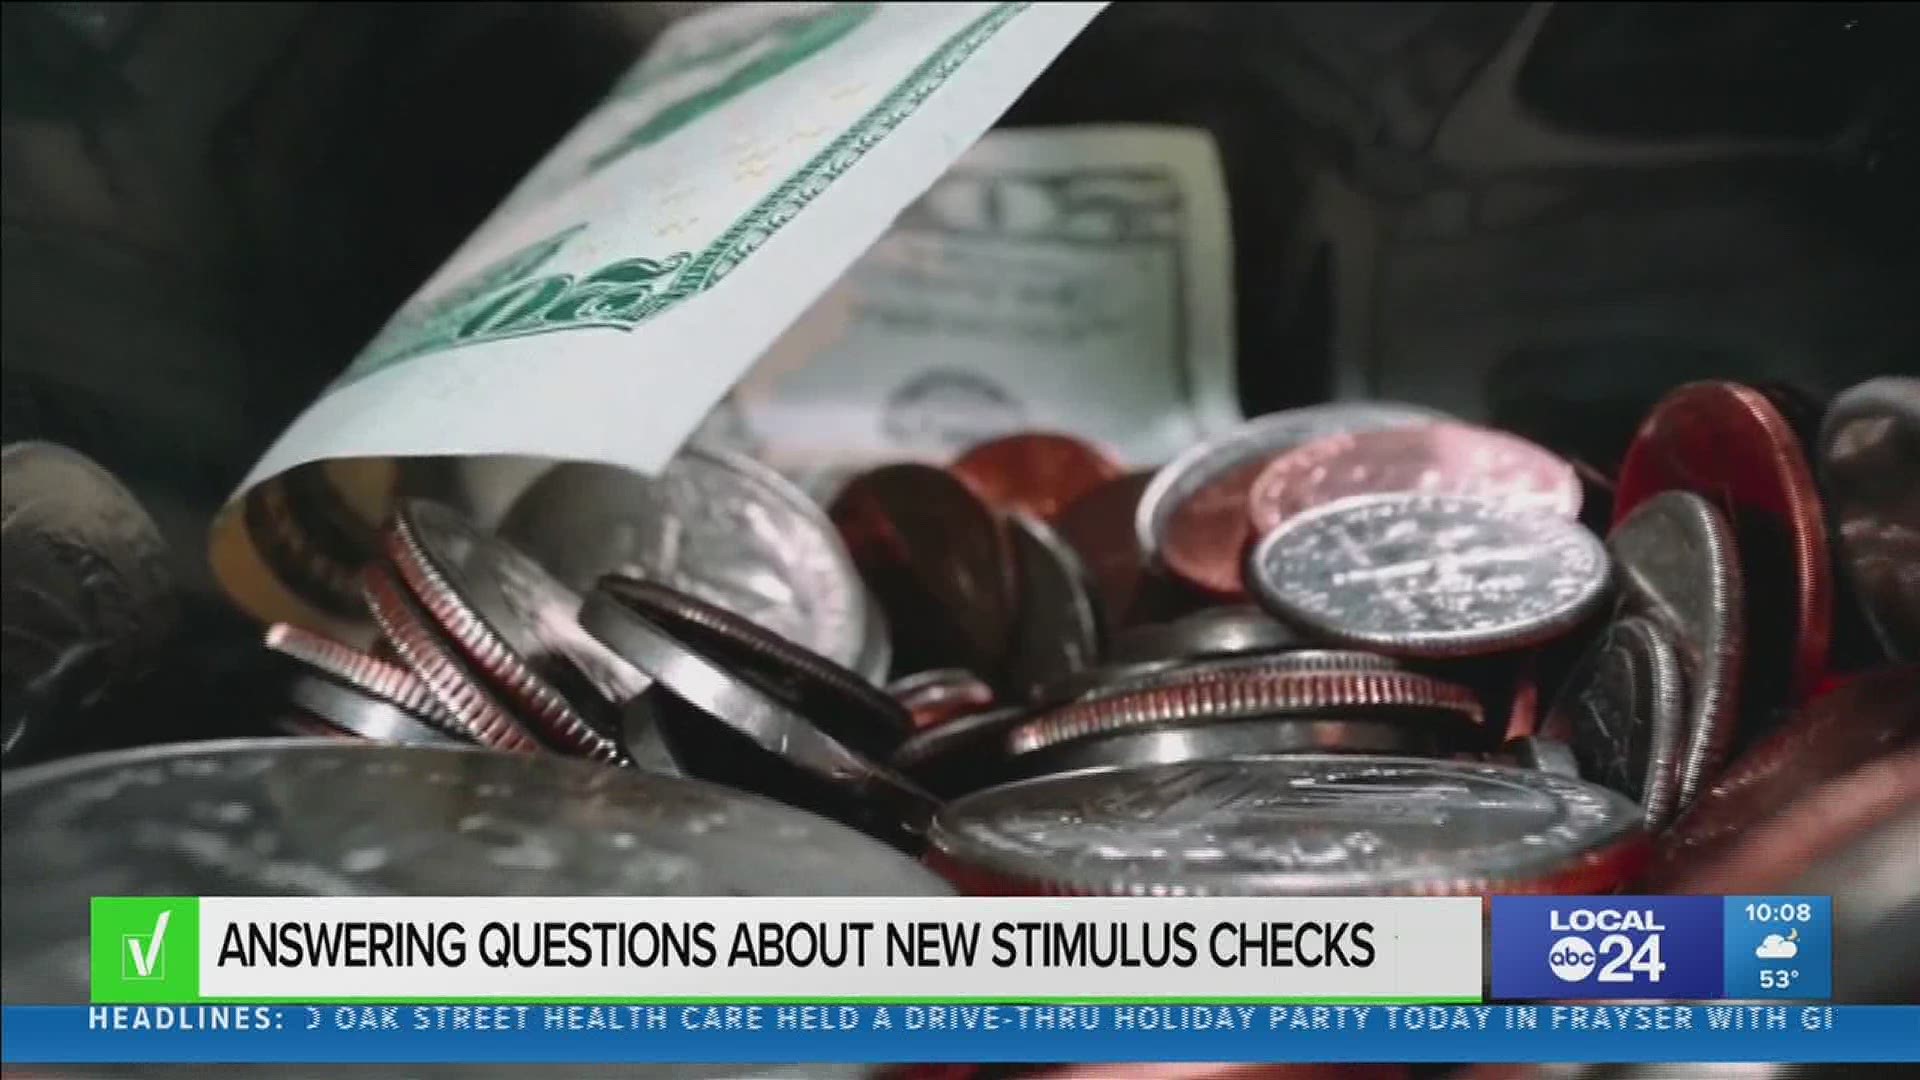 Local 24 Evening Anchor Rudy Williams discusses what the new stimulus check includes and clears up some of the confusion.